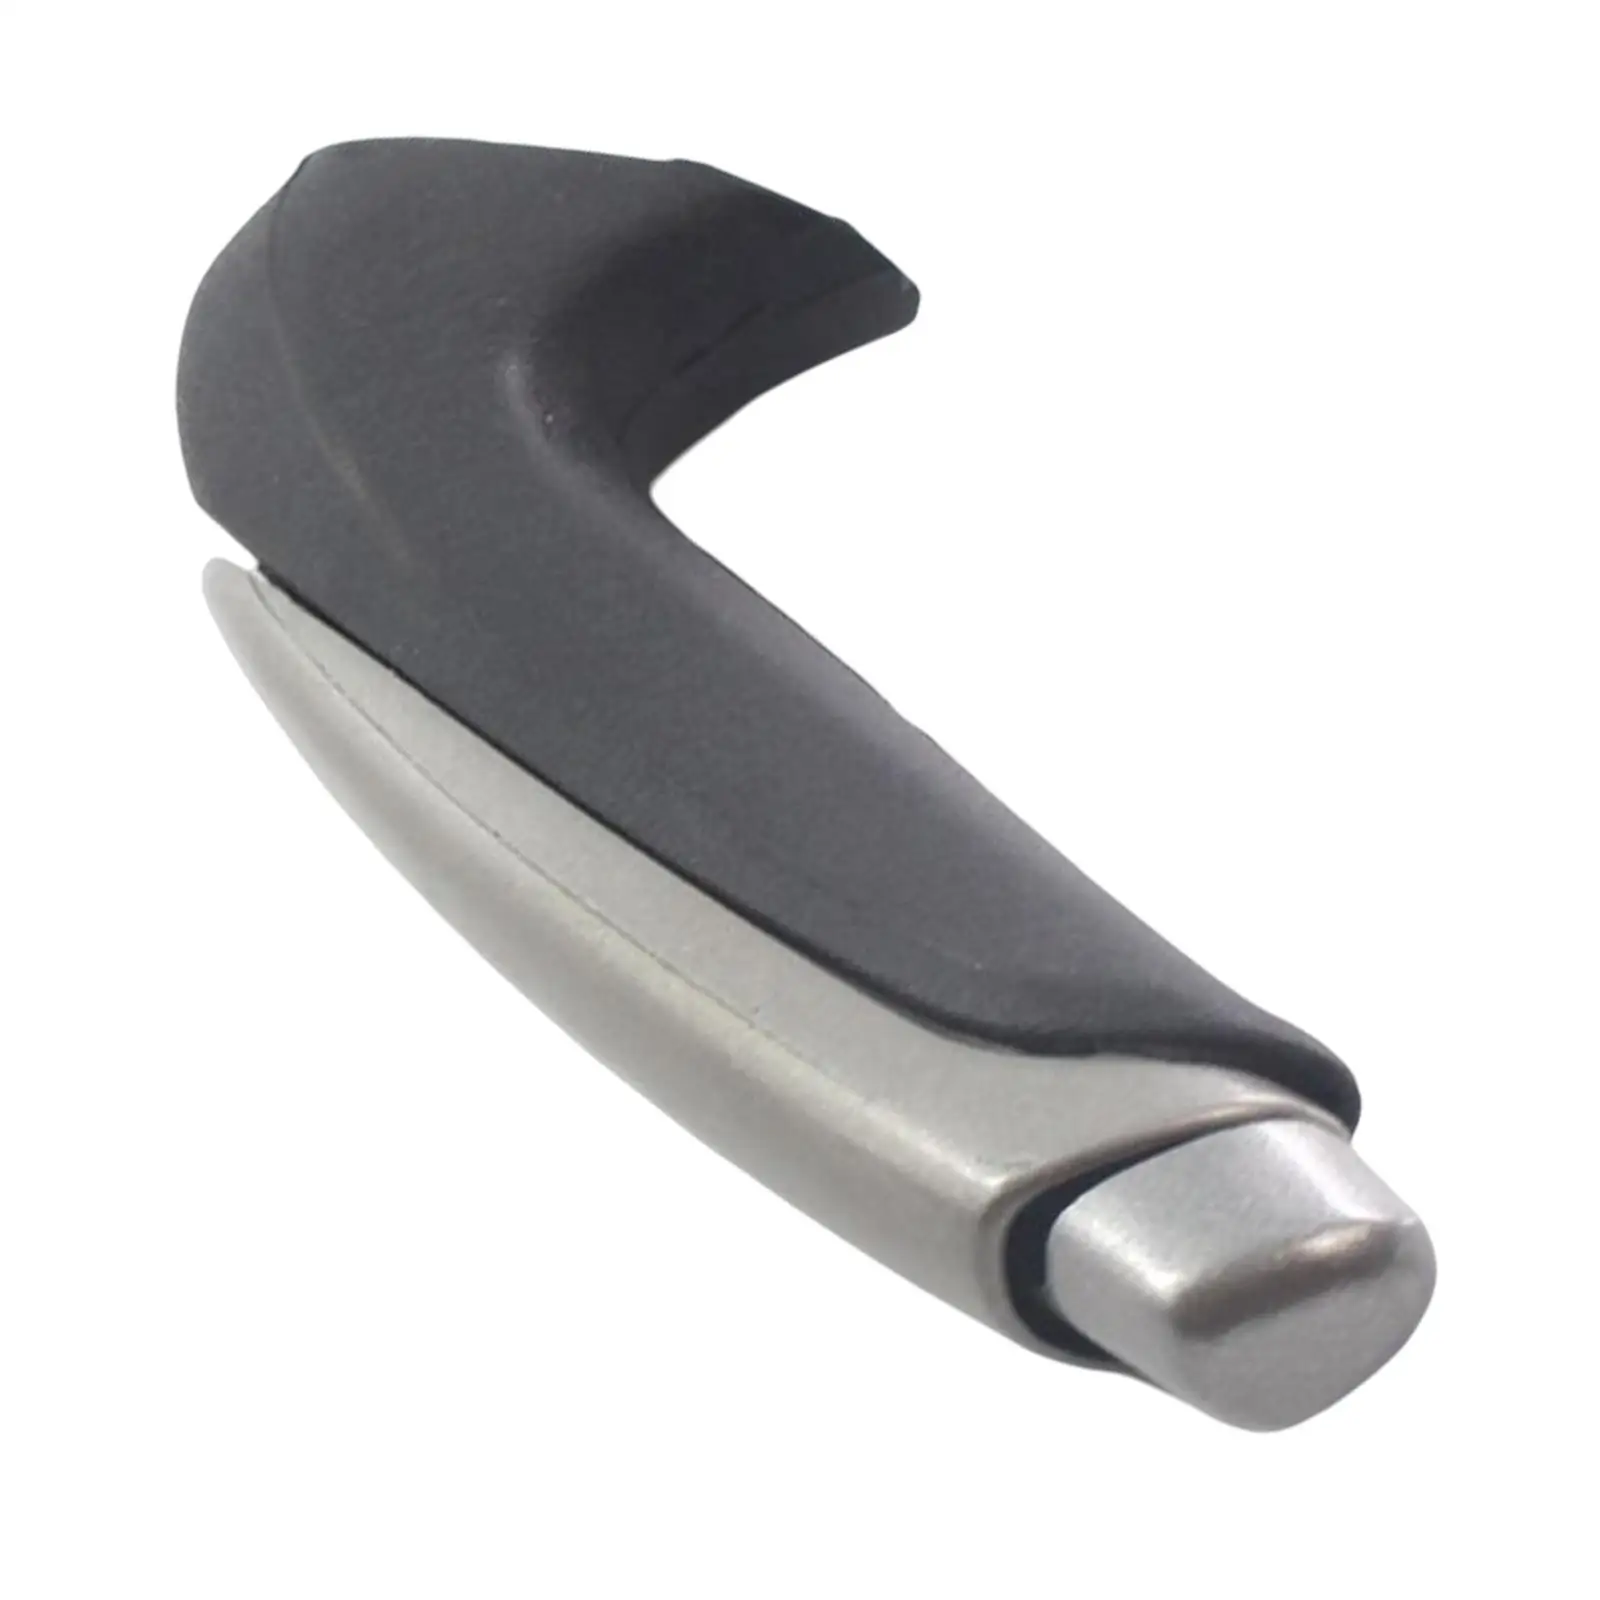 Handbrake Handle Lever Protector Cover for Replacement